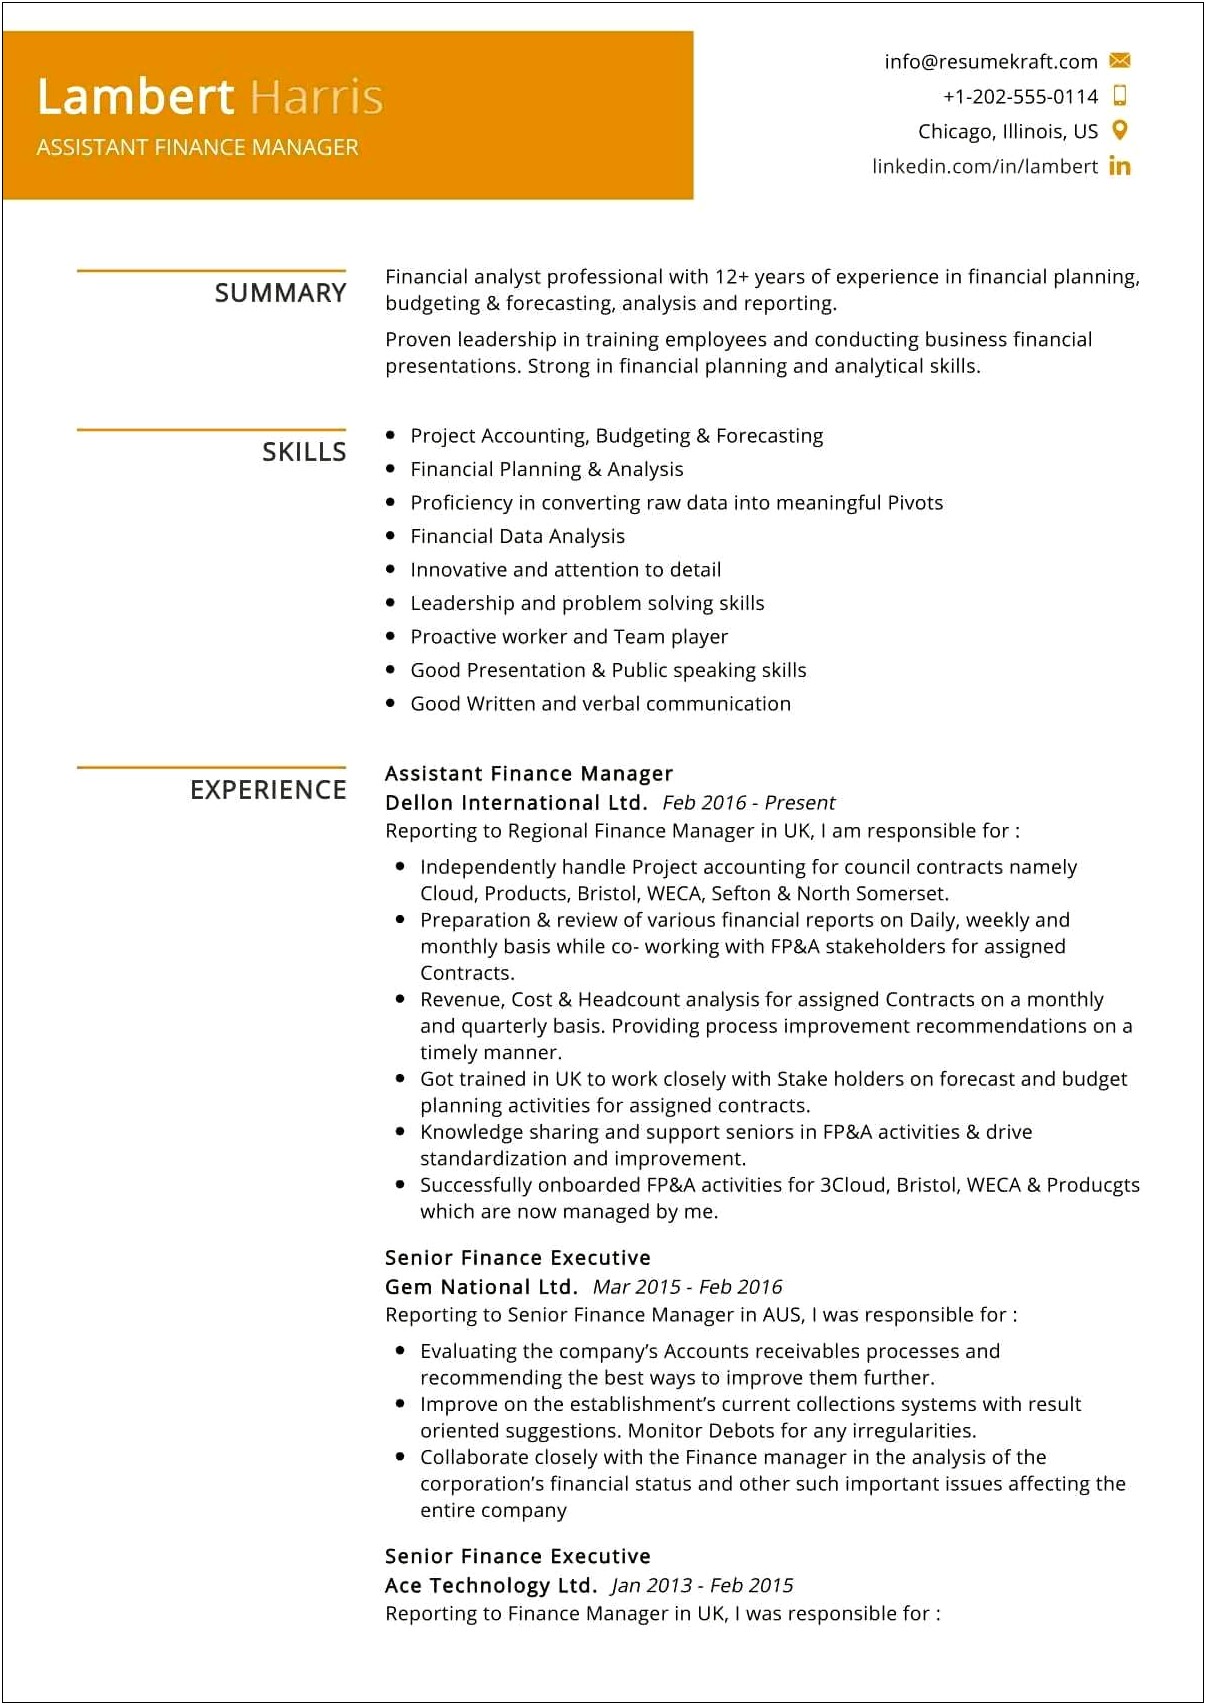 Resume Of Assistant Manager In Banks